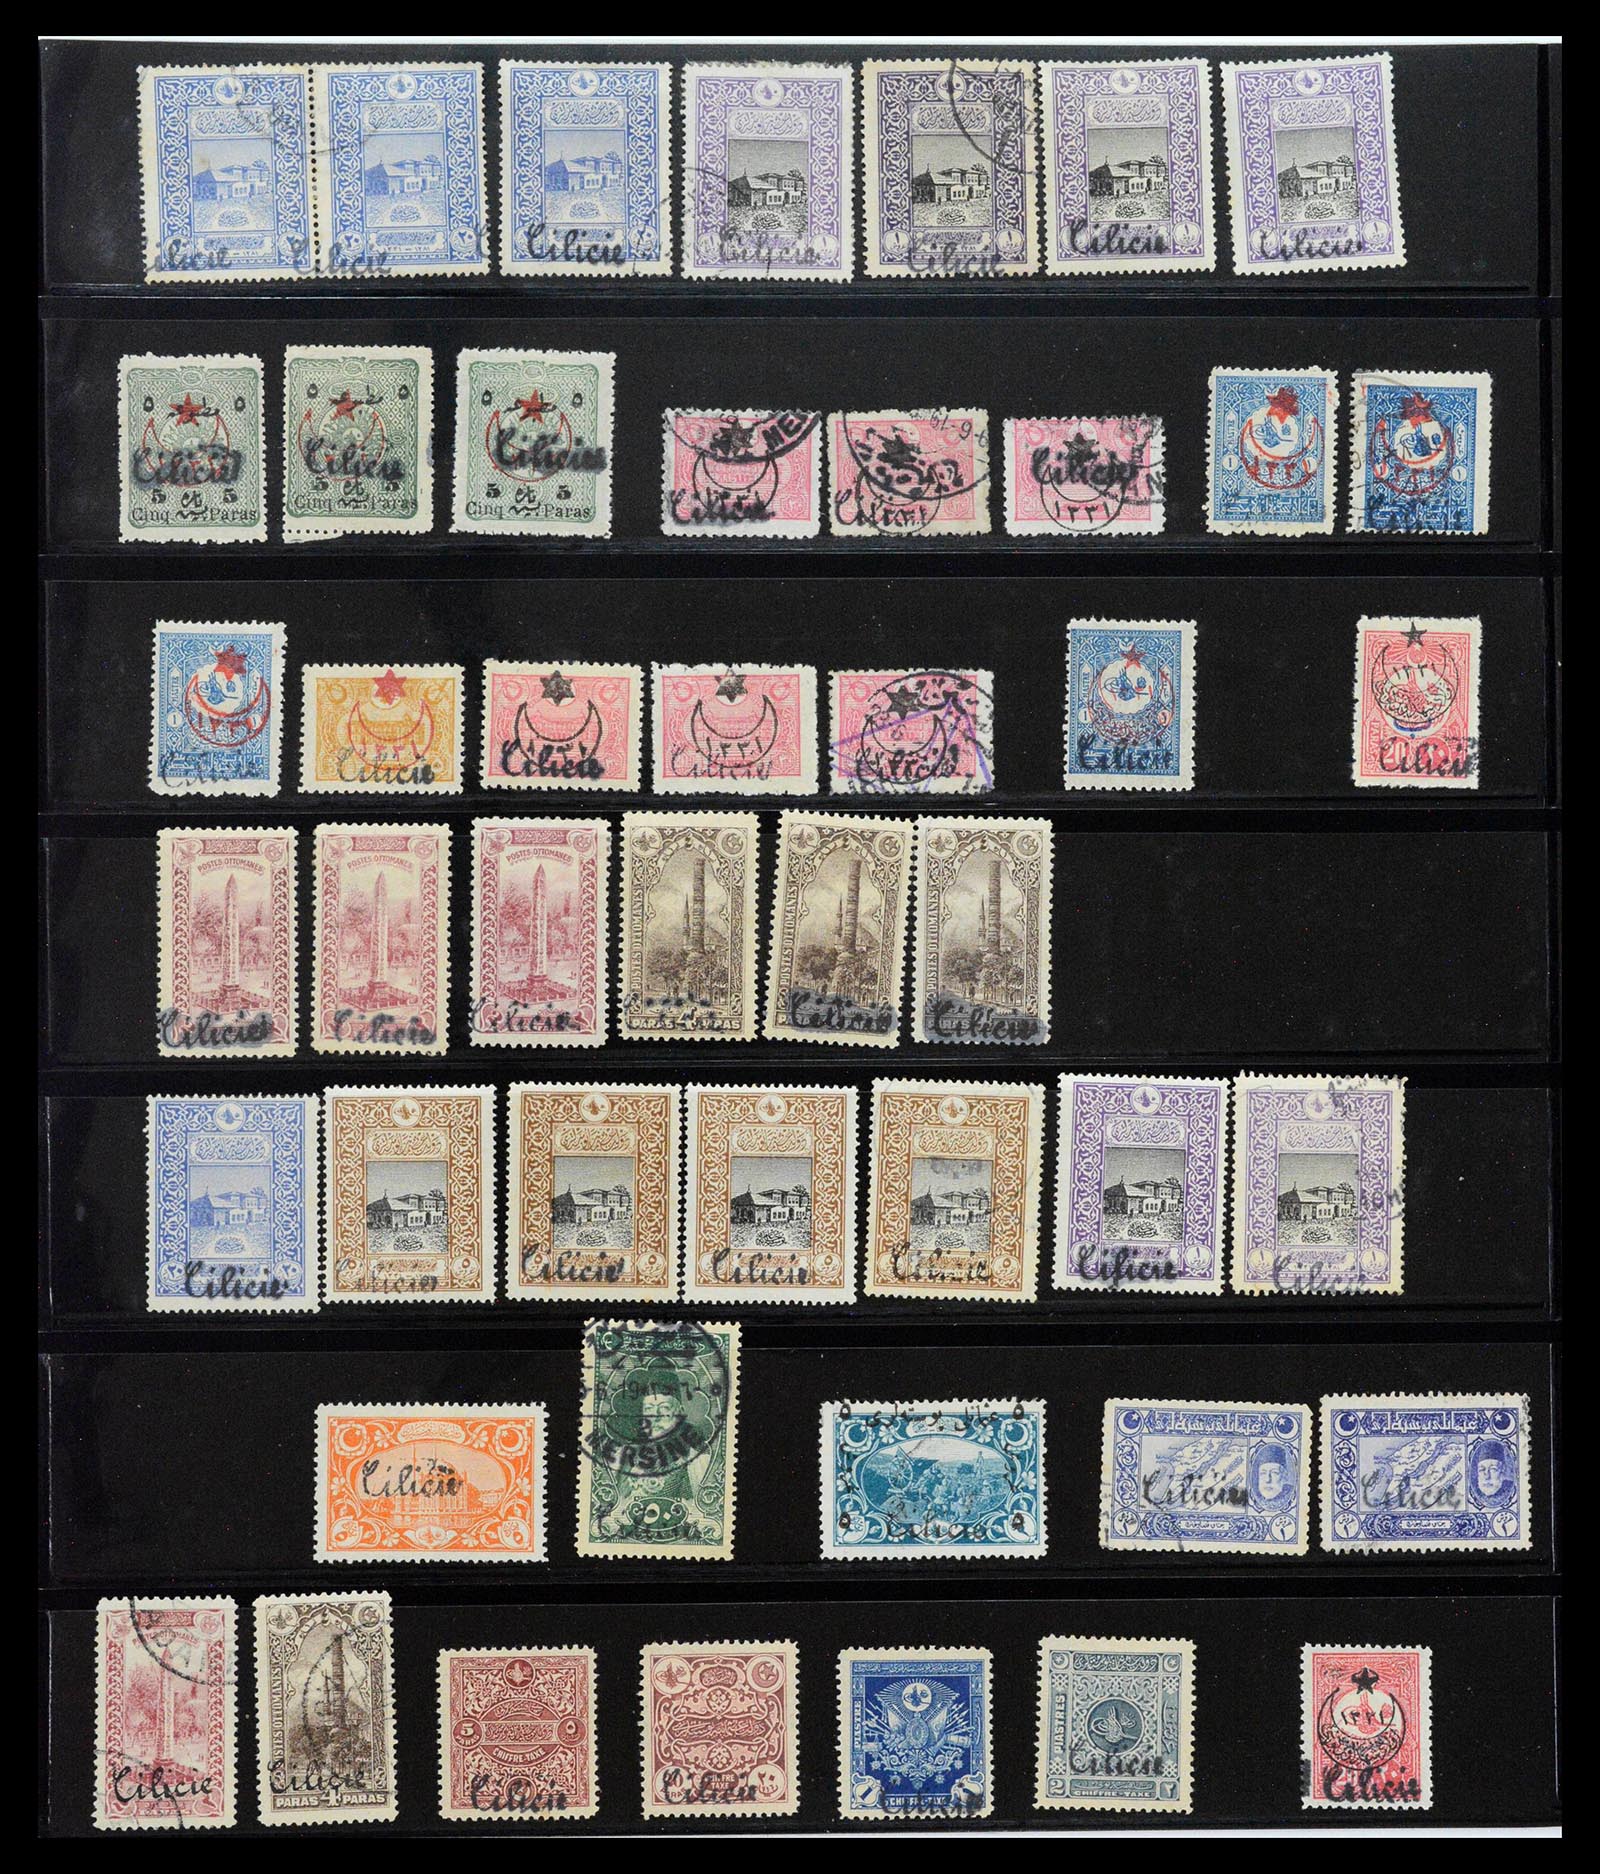 39457 0005 - Stamp collection 39457 Cilicia 1919-1921.